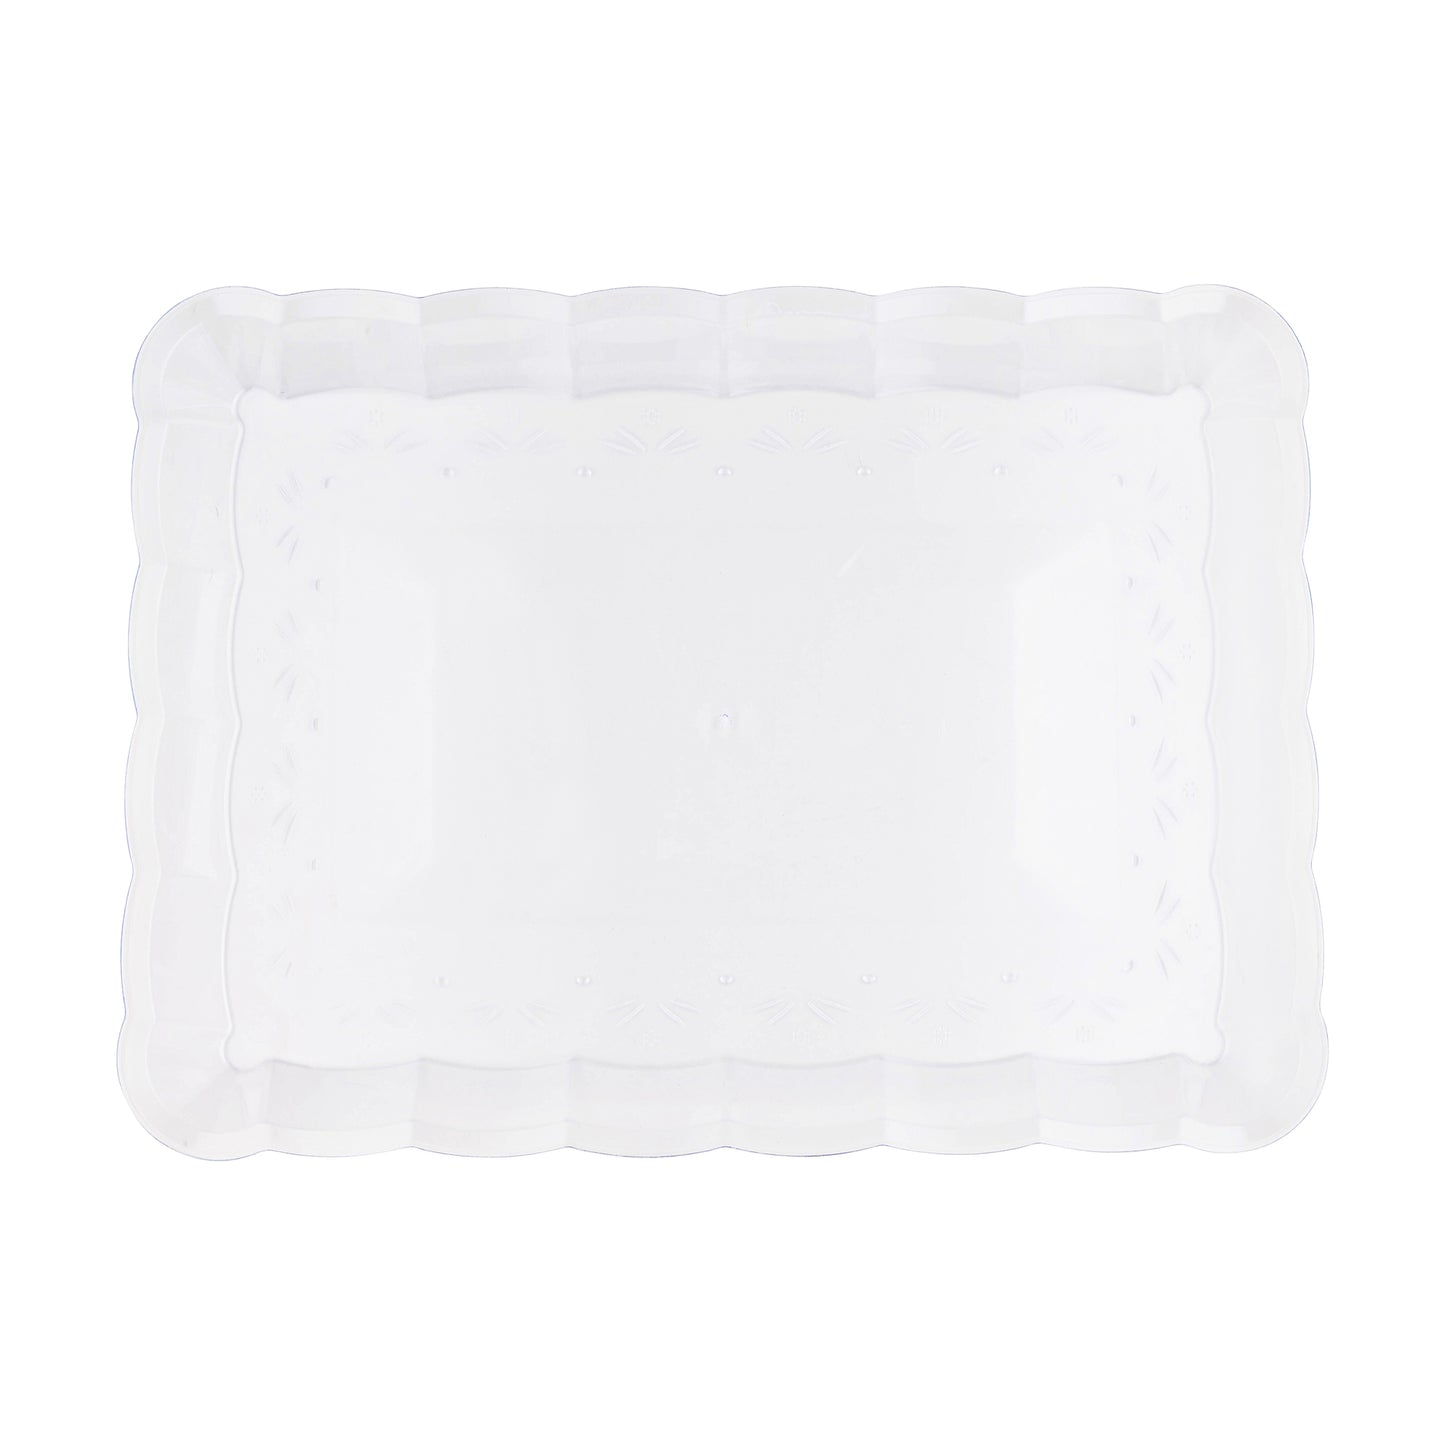 9" x 13" Clear Rectangular with Groove Rim Disposable Plastic Serving Trays